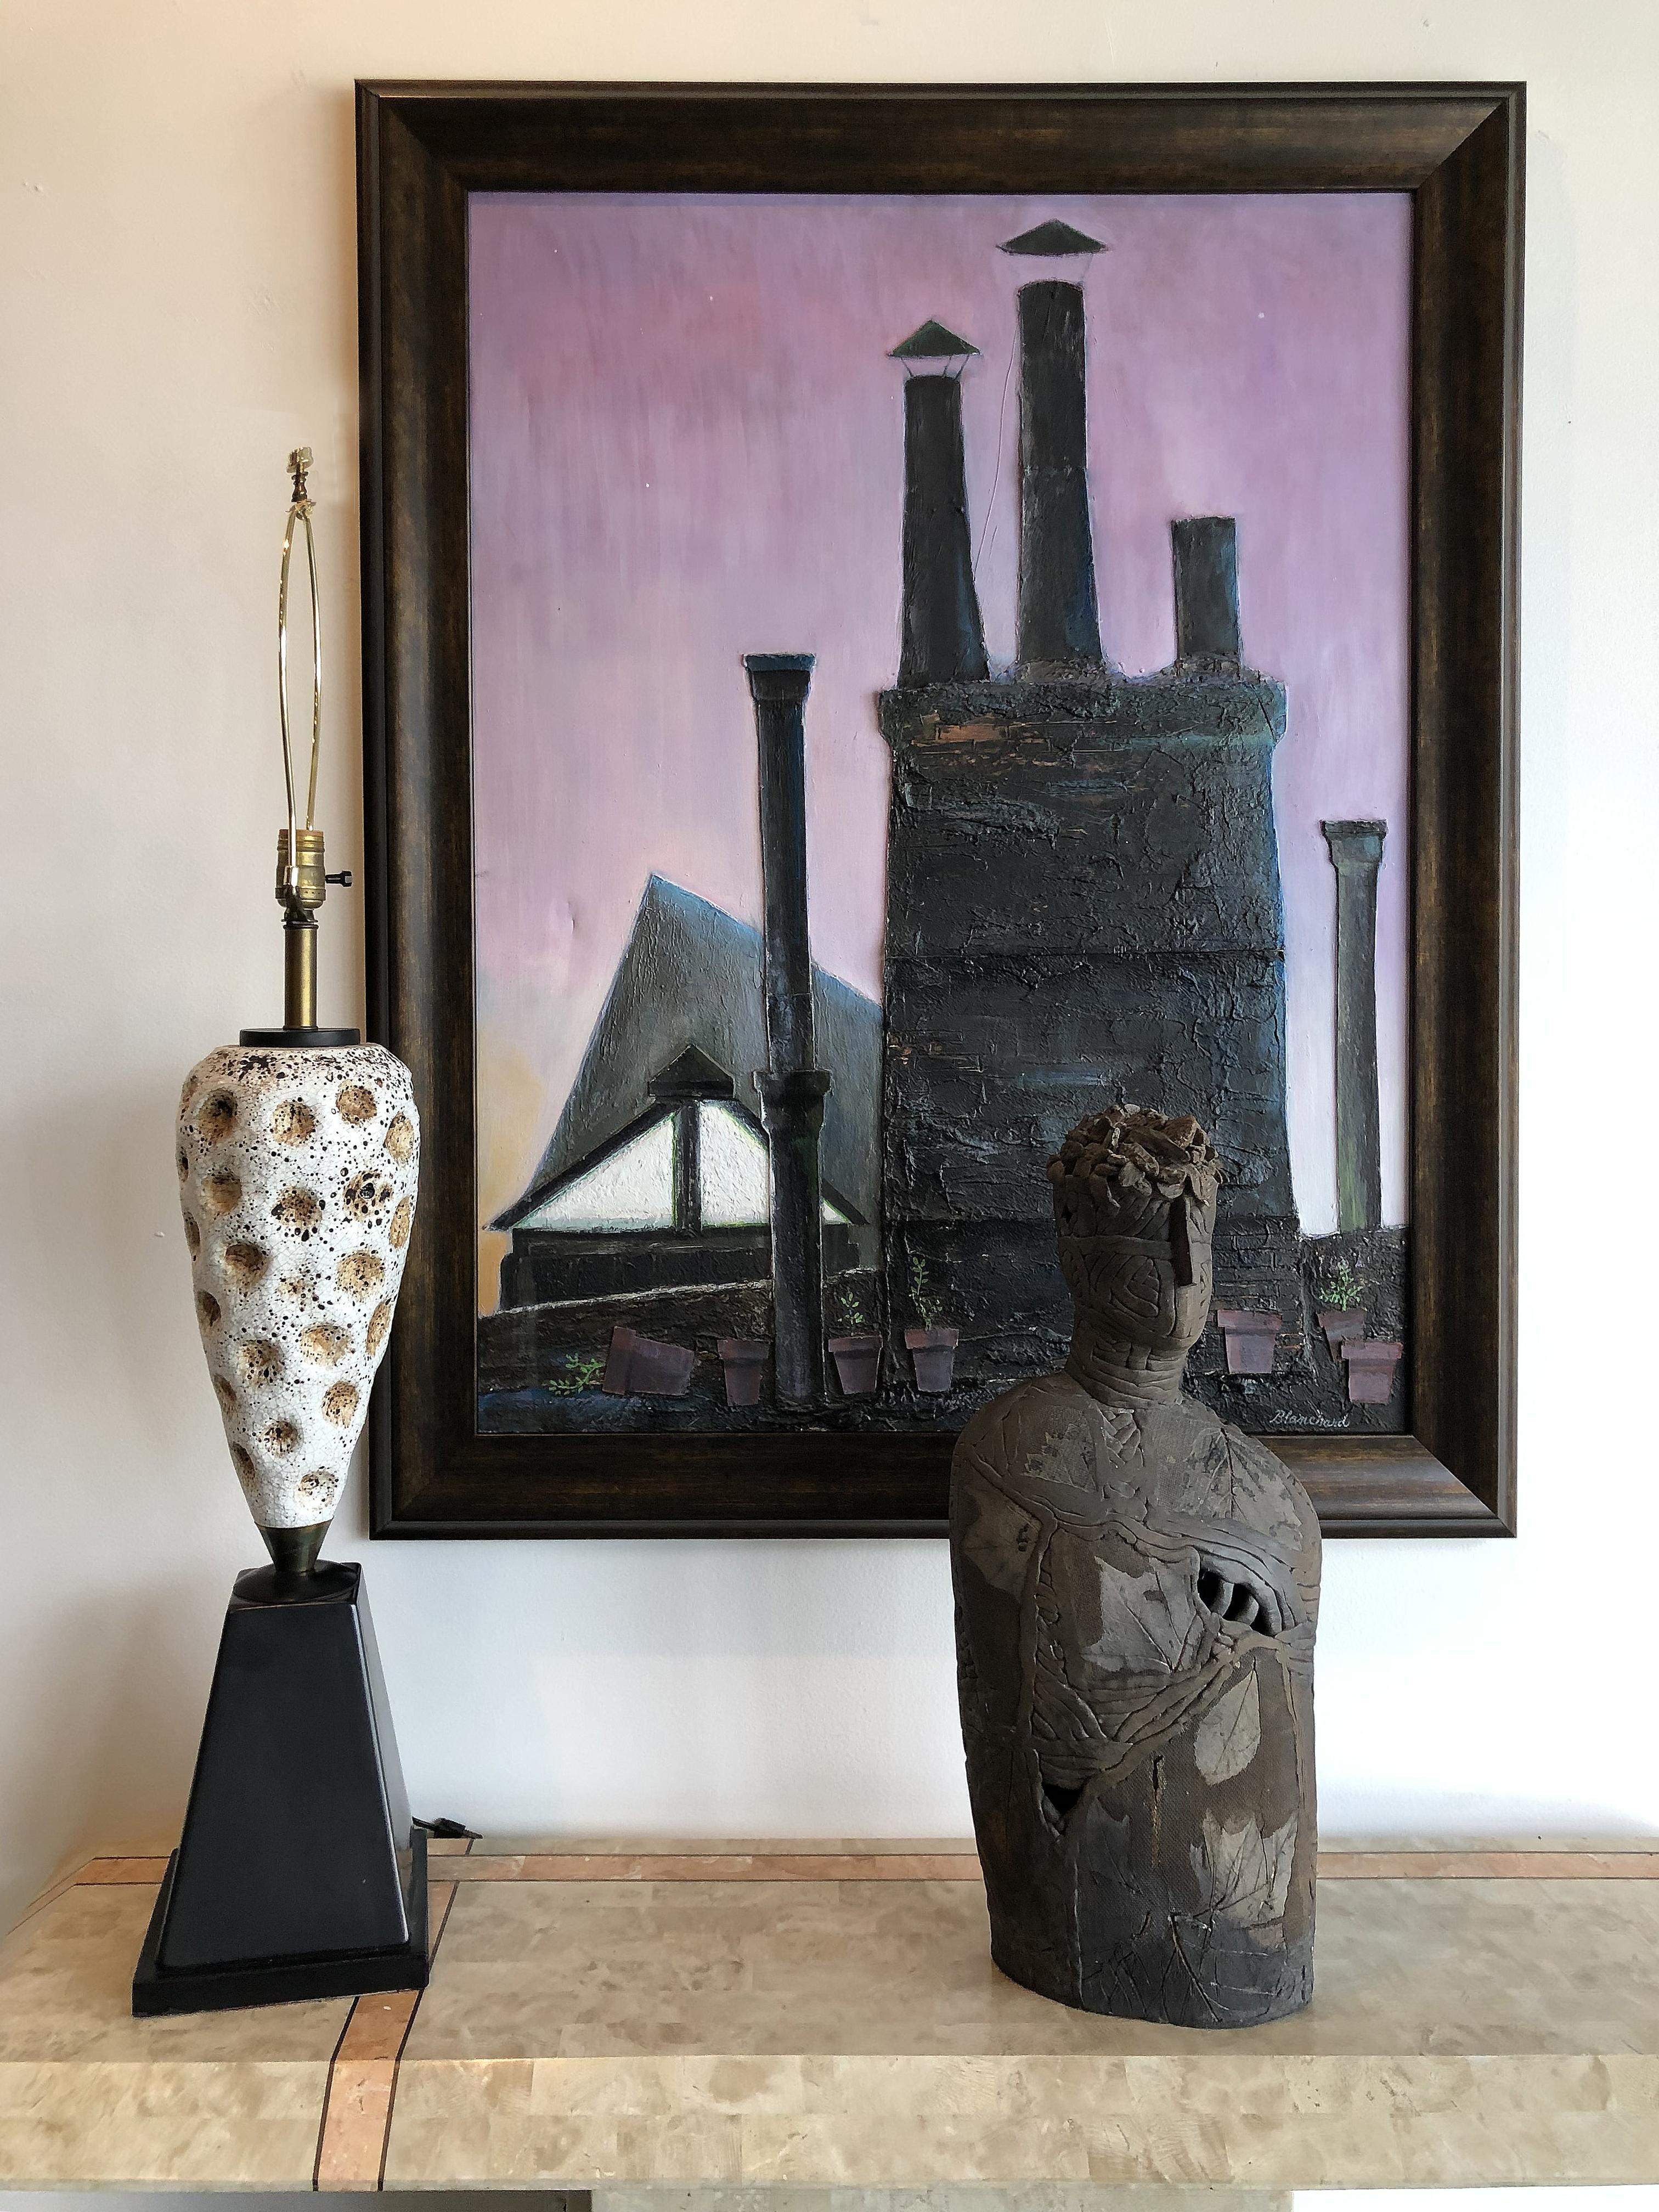 Industrial mixed-media oil painting by Robert Blanchard

Offered for sale is a vintage 1960s Industrial mix media oil on canvas by Robert Blanchard. The painting encompasses a textured roof garden with raised dimensional stacks and flower pots.